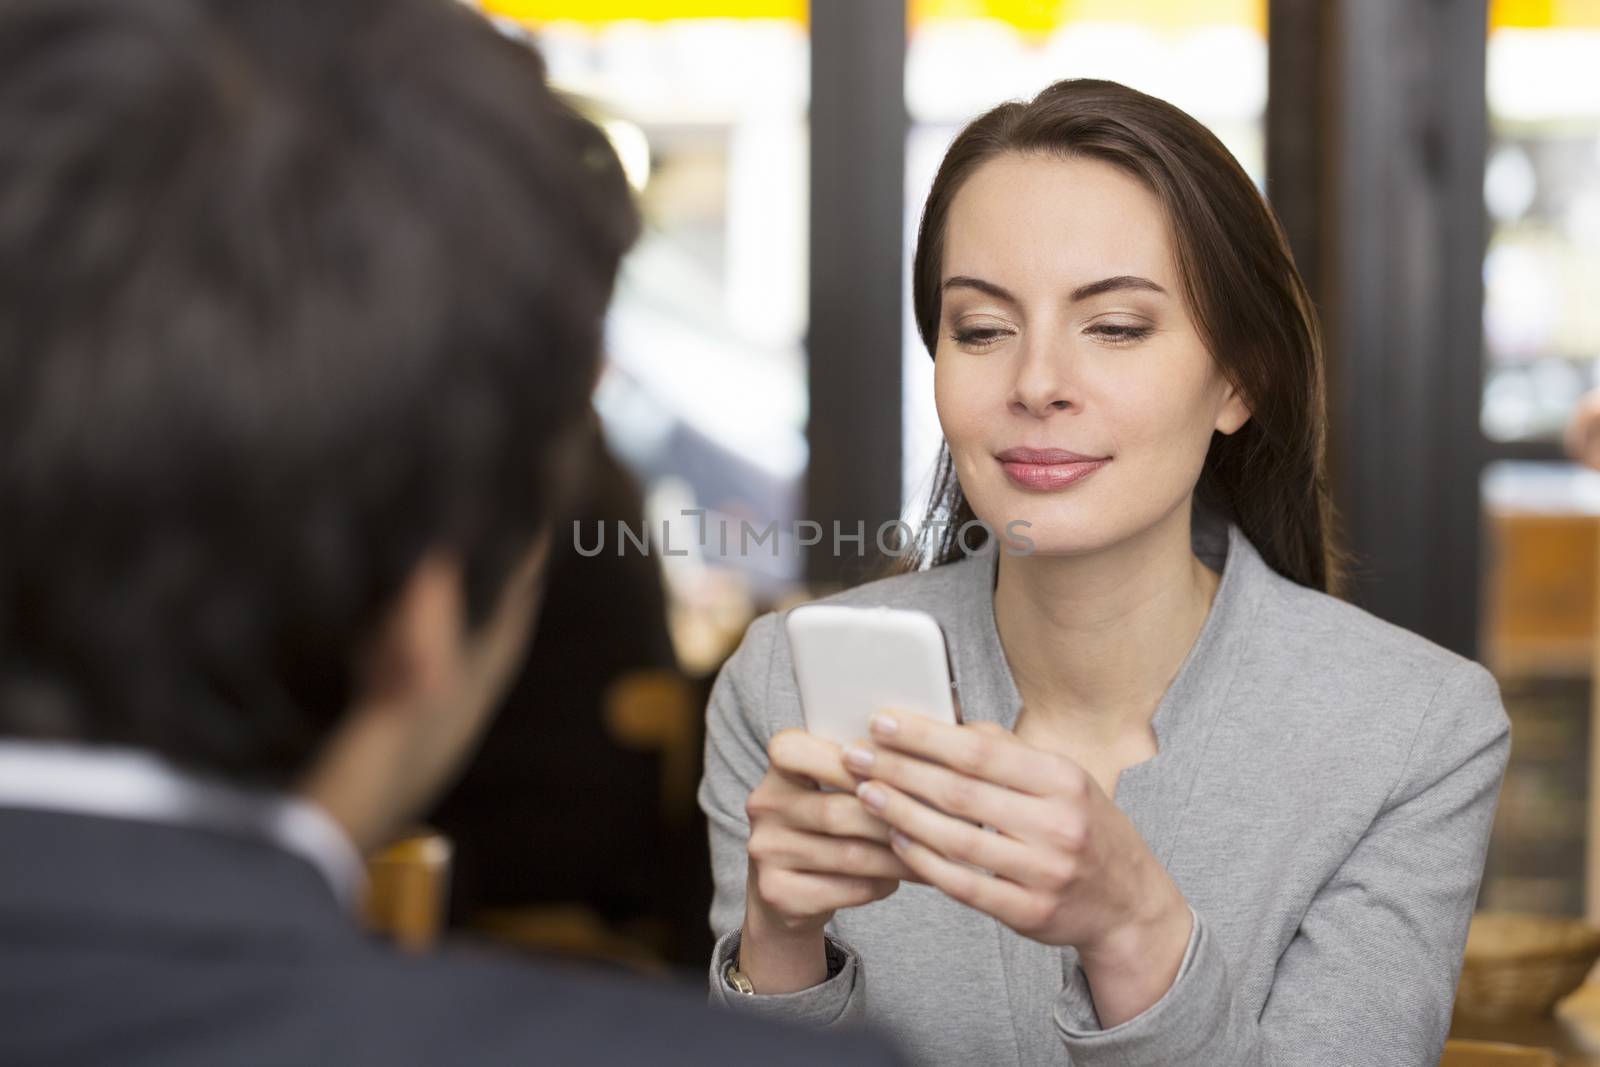 Couple in restaurant breakfasted, woman is on the phone, sms, su by LDProd